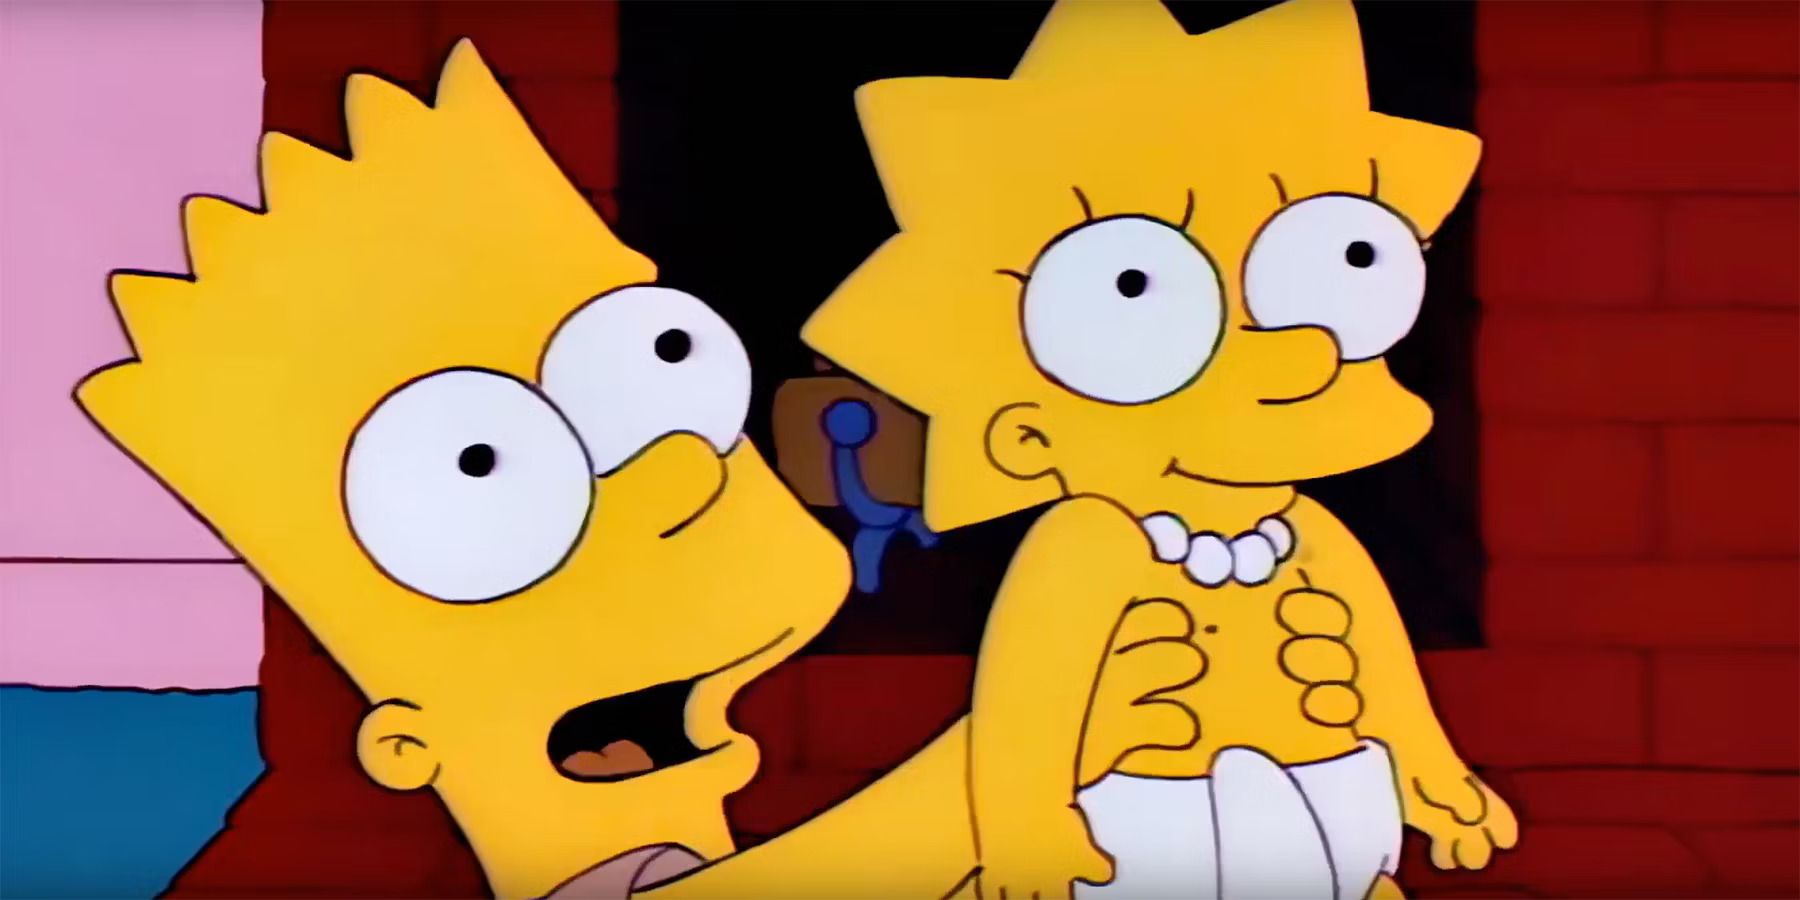 A still from the Simpsons episode "Lisa's First Word" featuring a young Bart Simpson holding a baby Lisa Simpson